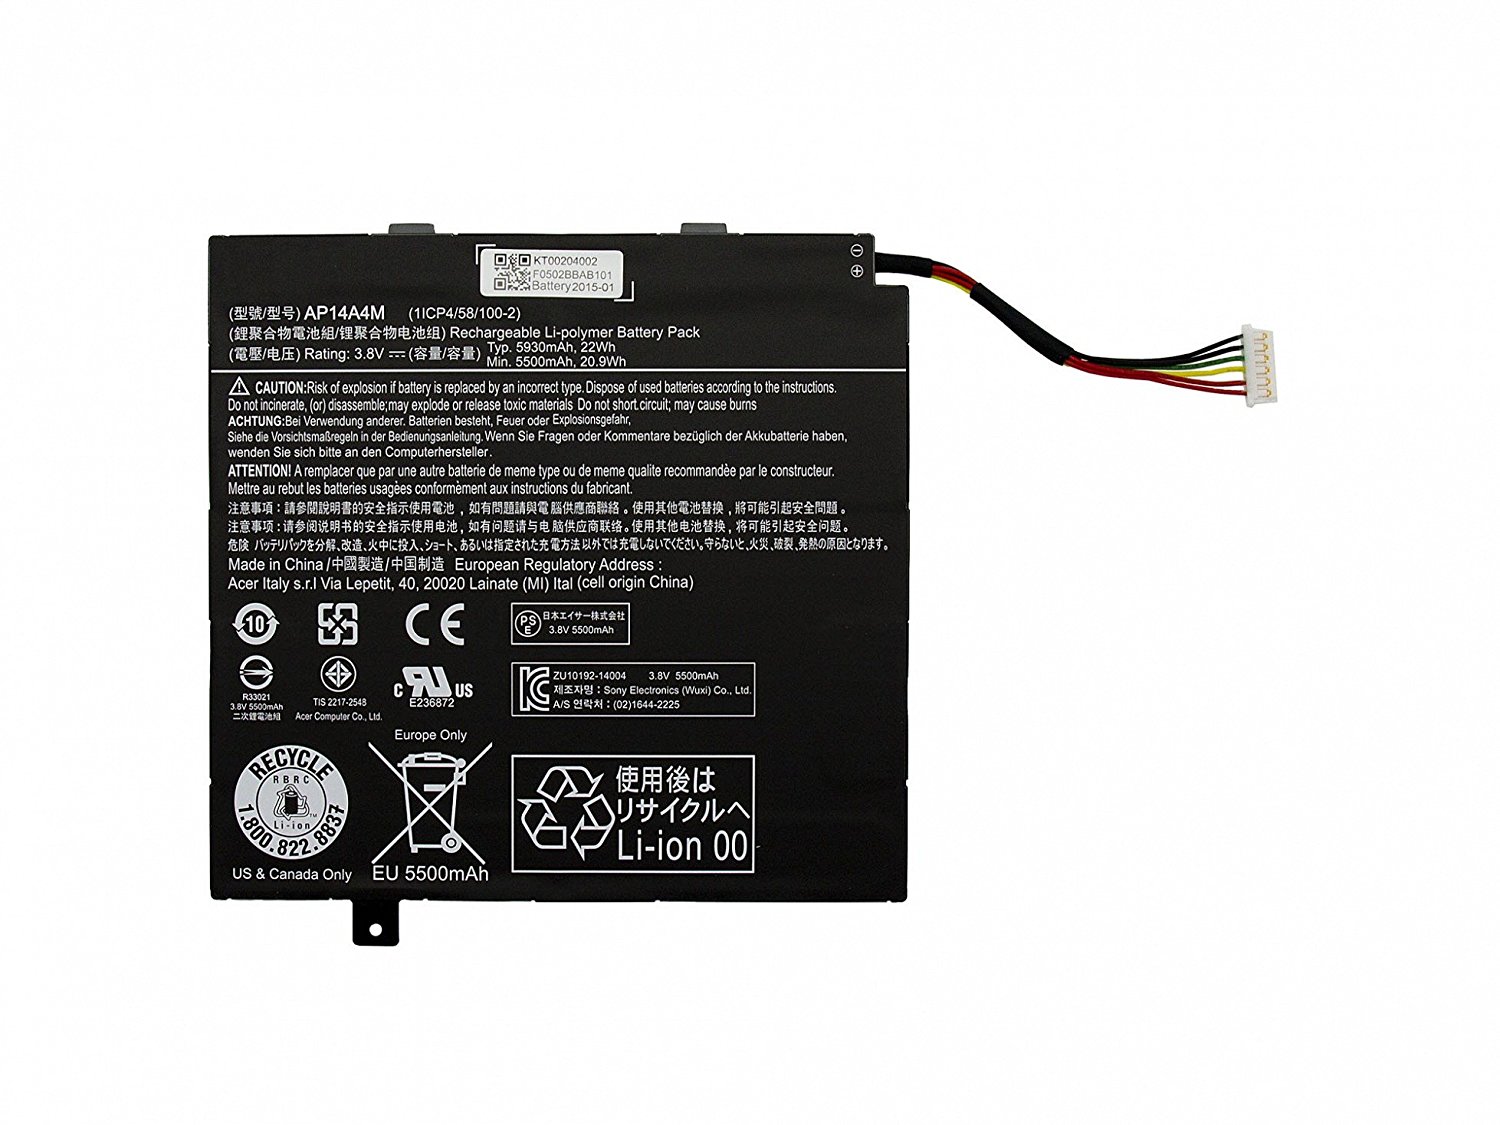   Acer Swith 10 SW5, Switch 10e SW3, Iconia Tab 10 A3-20, A3-30 (AP14A4M), 22Wh, 3.8V